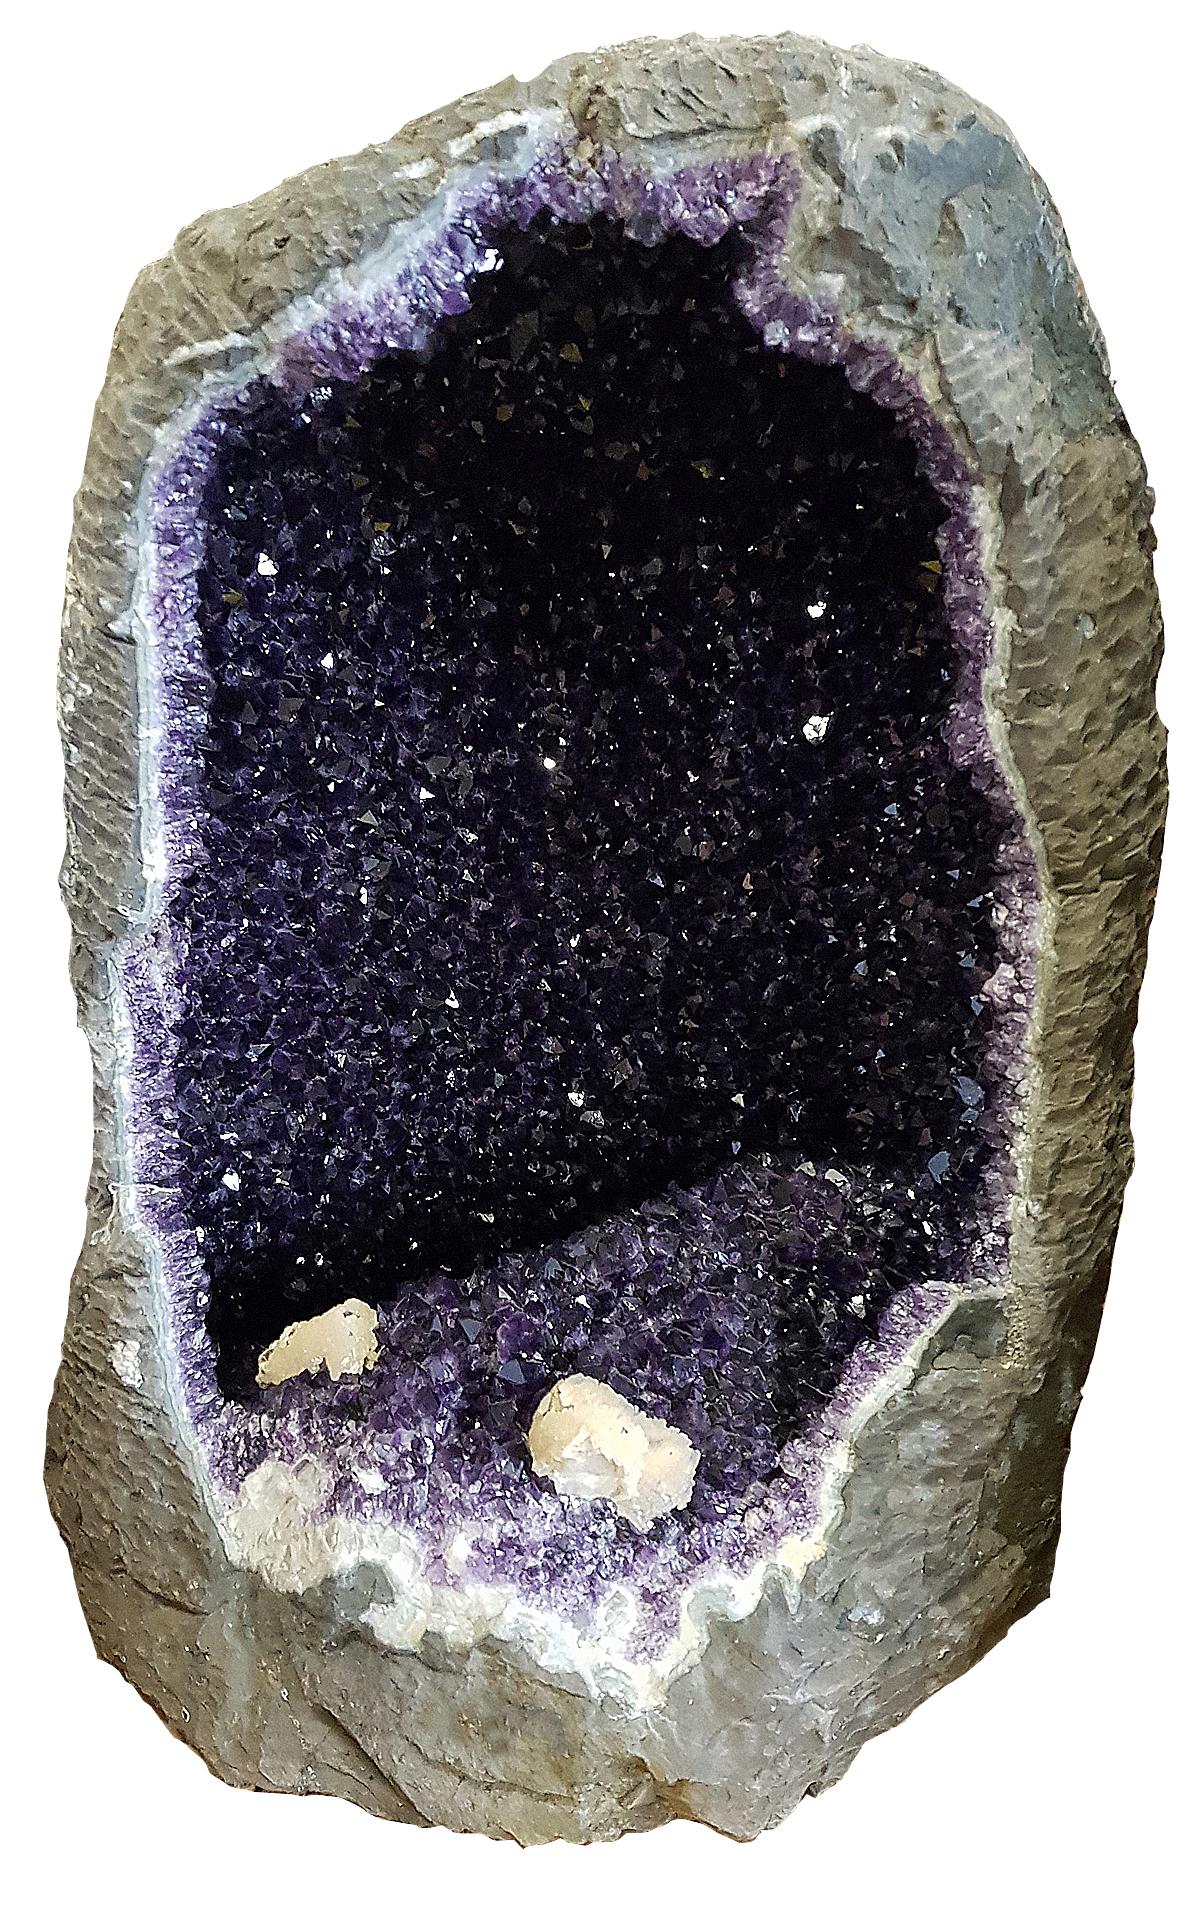 Amethyst-druse with Calcite inclusions